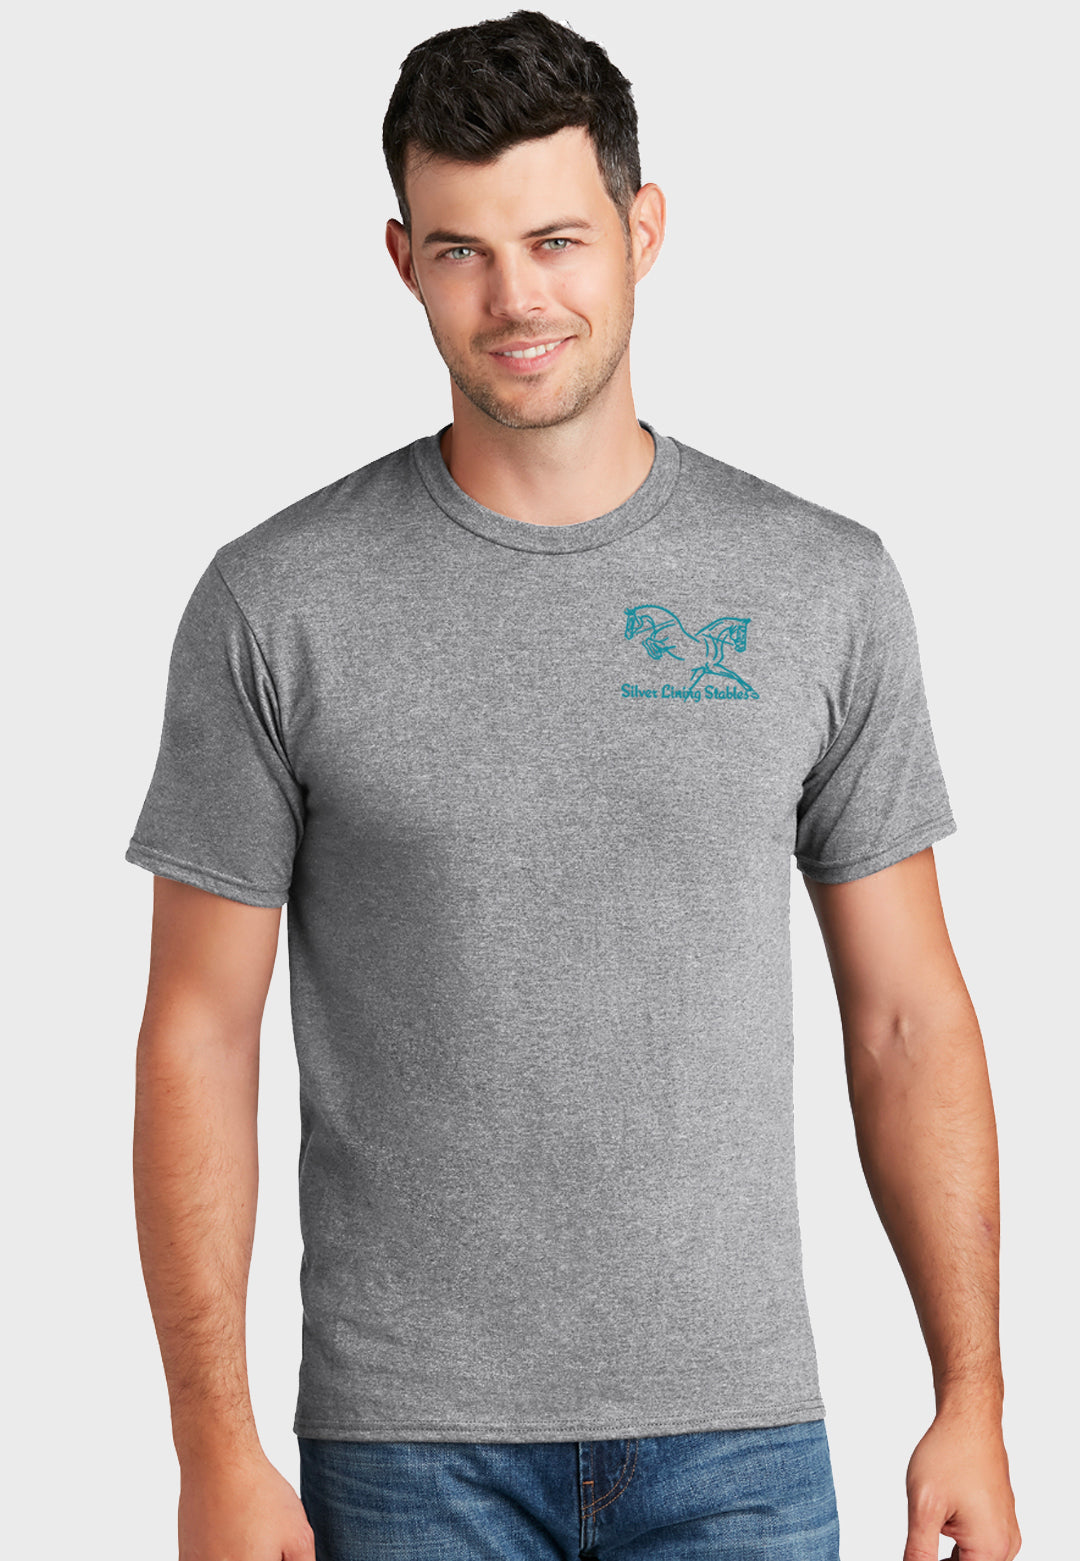 Silver Lining Stables Port & Company® Fan Favorite™ Tee - Adult Unisex, 2 Color Options